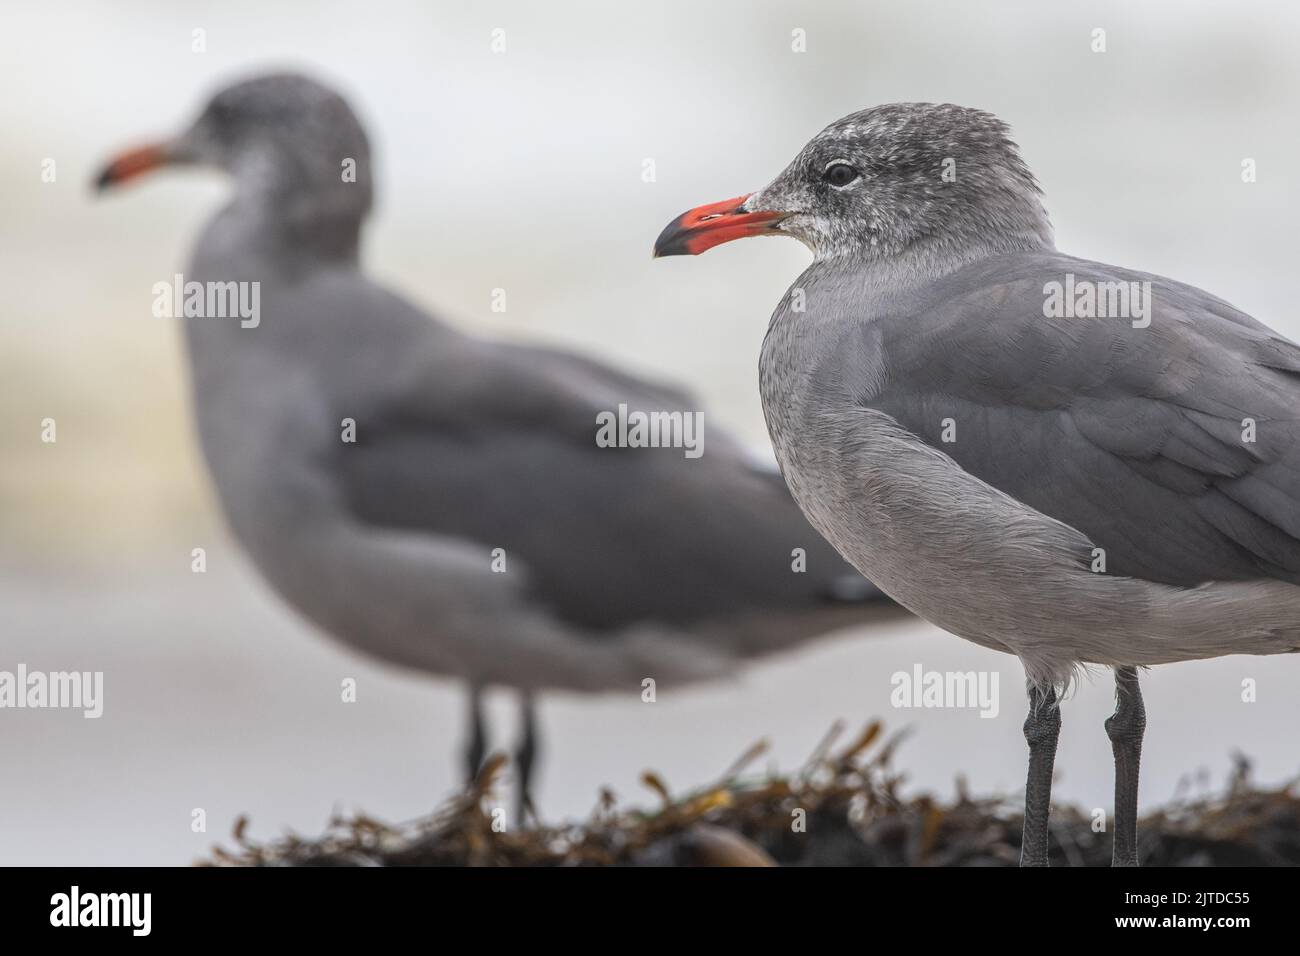 A pair of Heerman's gull (Larus heermanni) on the beach in Point Reyes National seashore, a bird species endemic to the West Coast of North America. Stock Photo